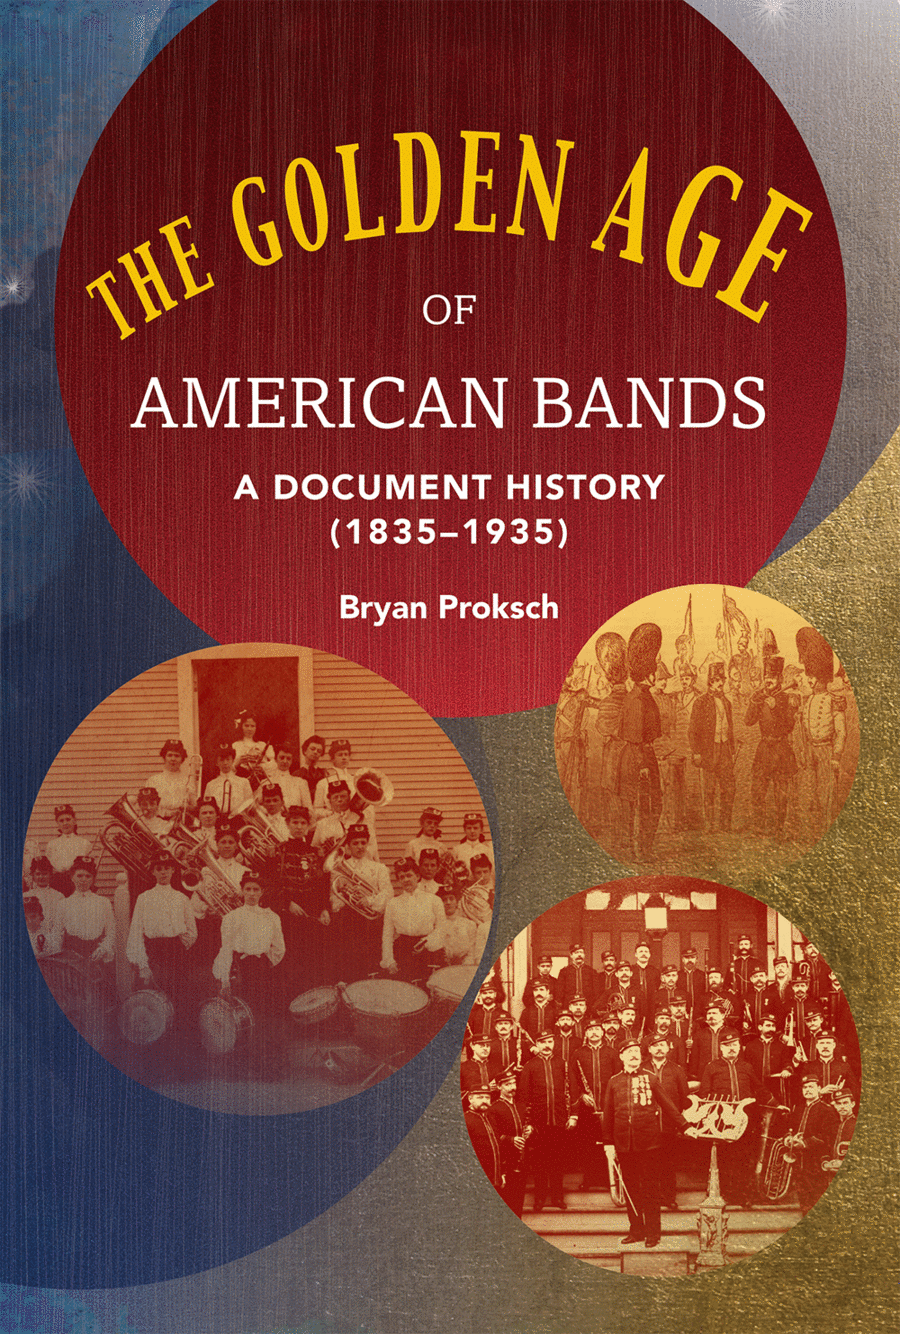 The Golden Age of American Bands